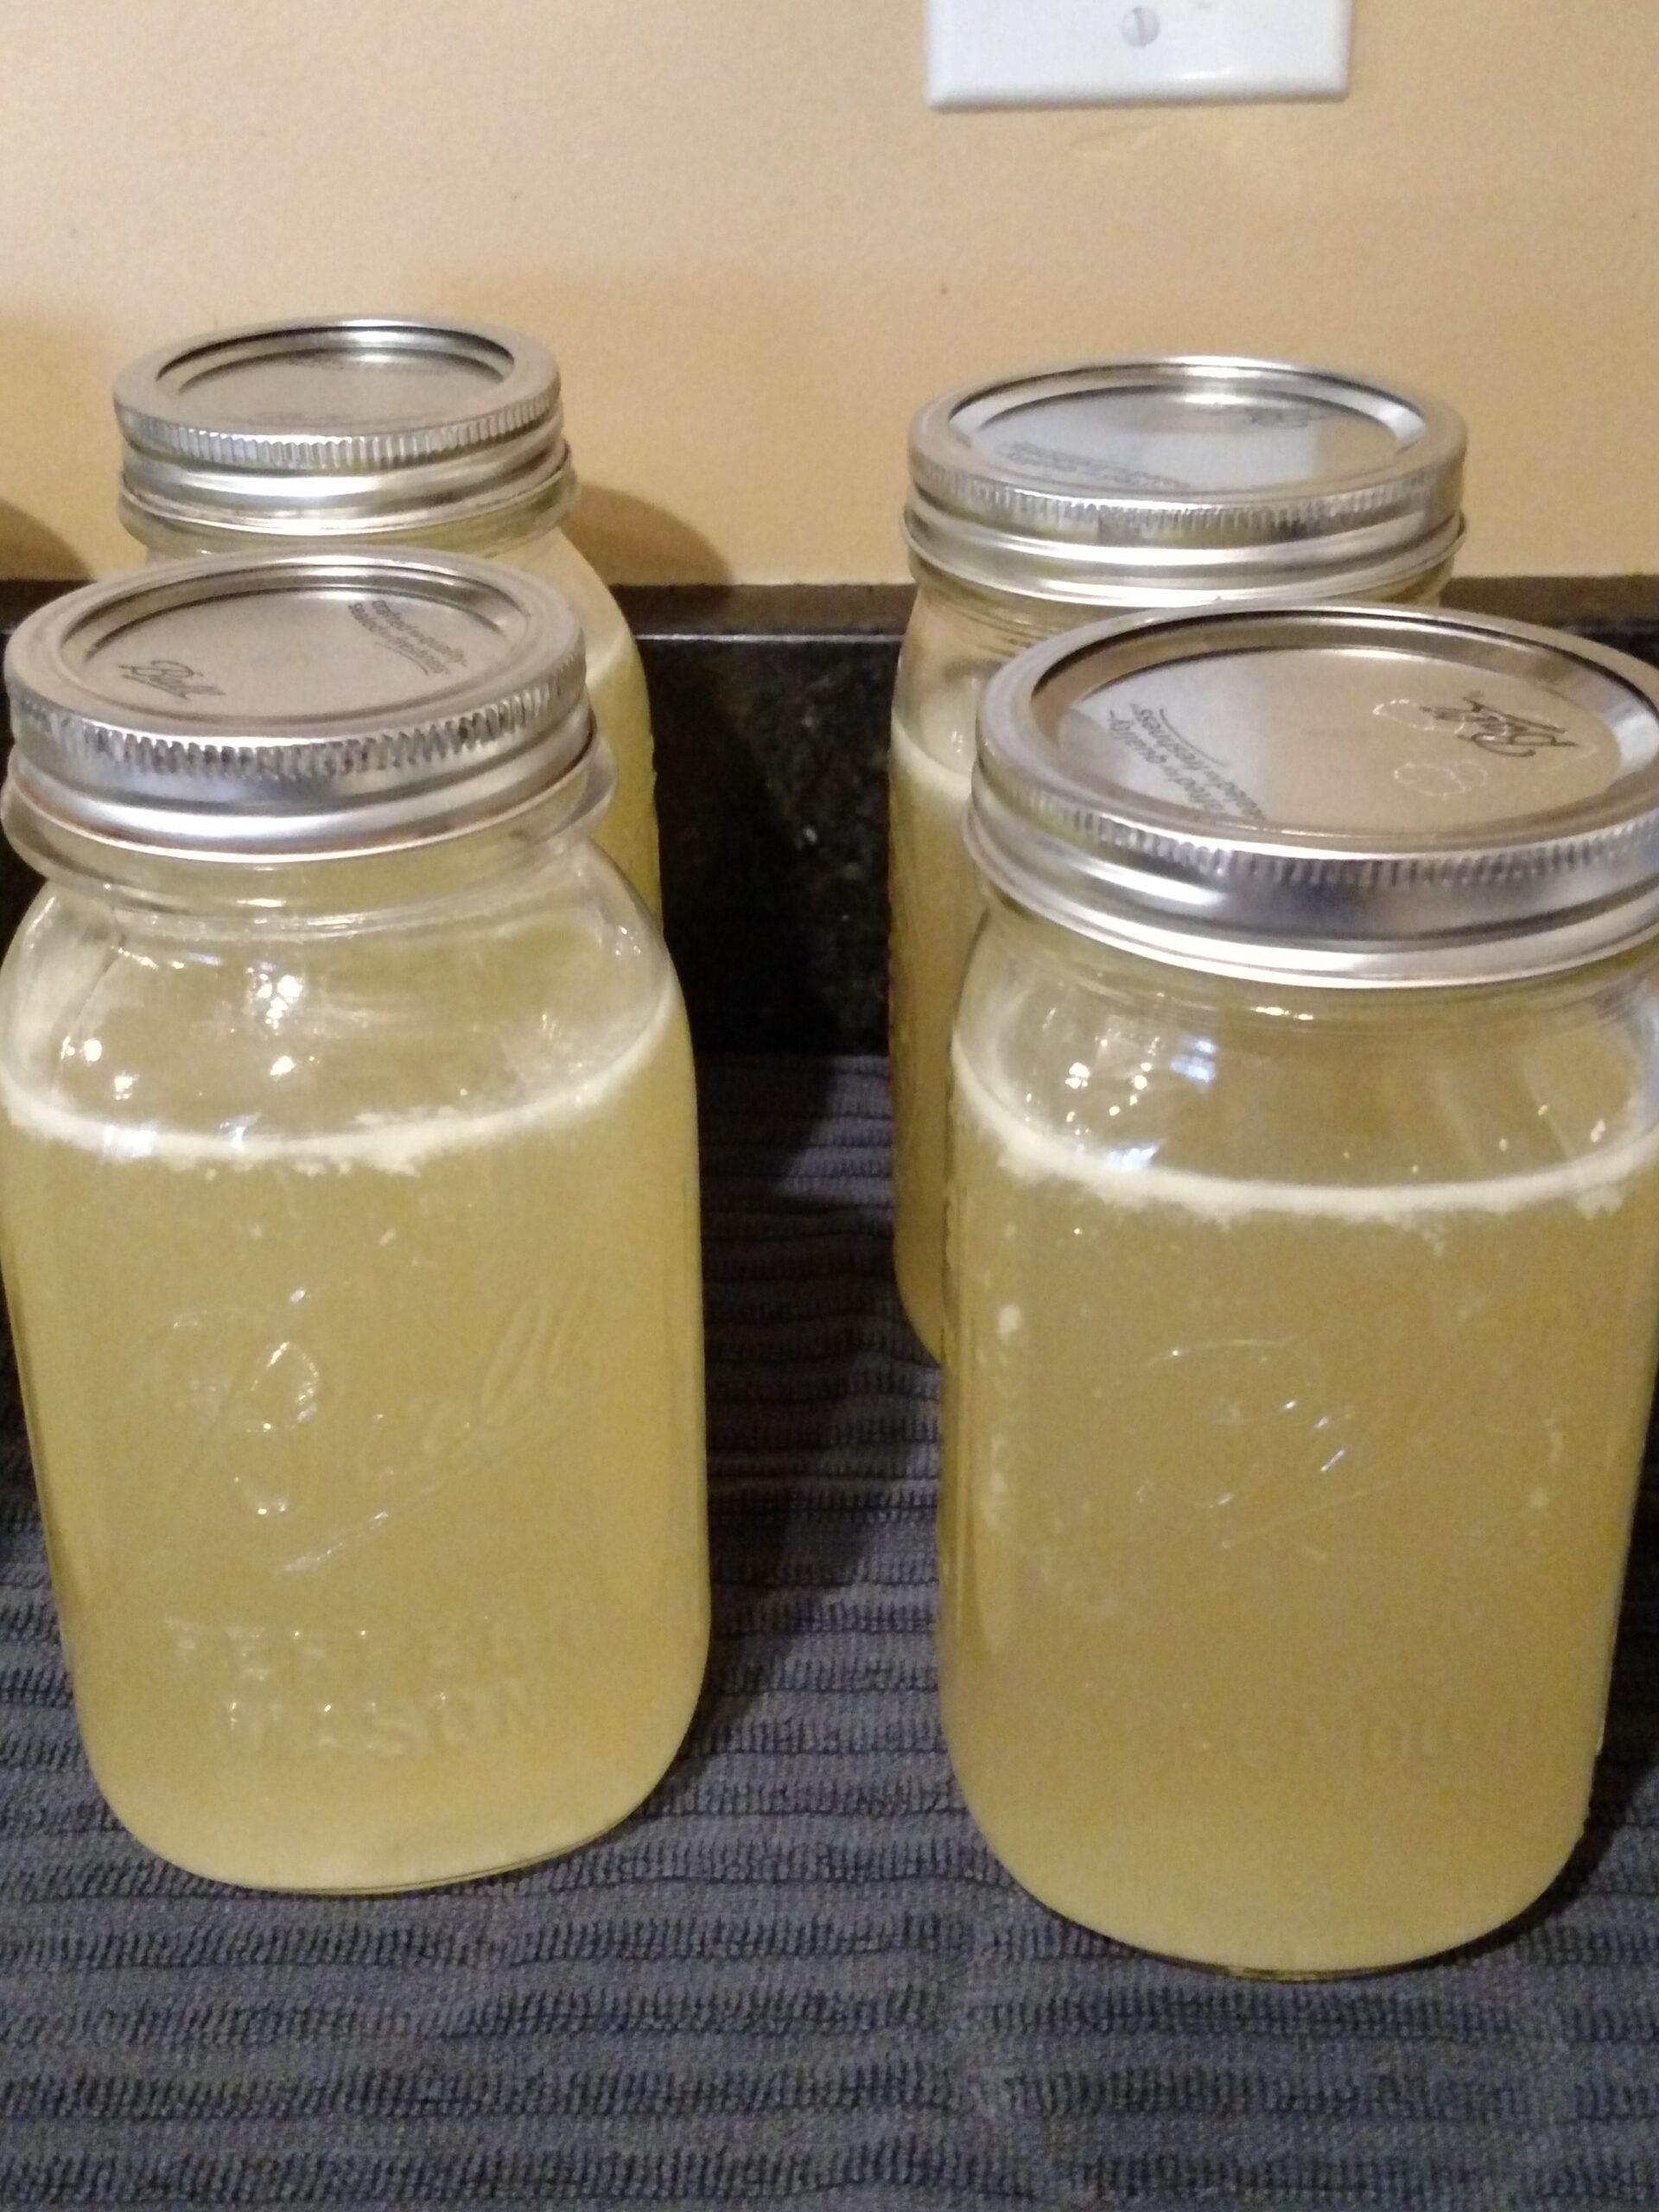 4 jars of home canned chicken broth quarts.